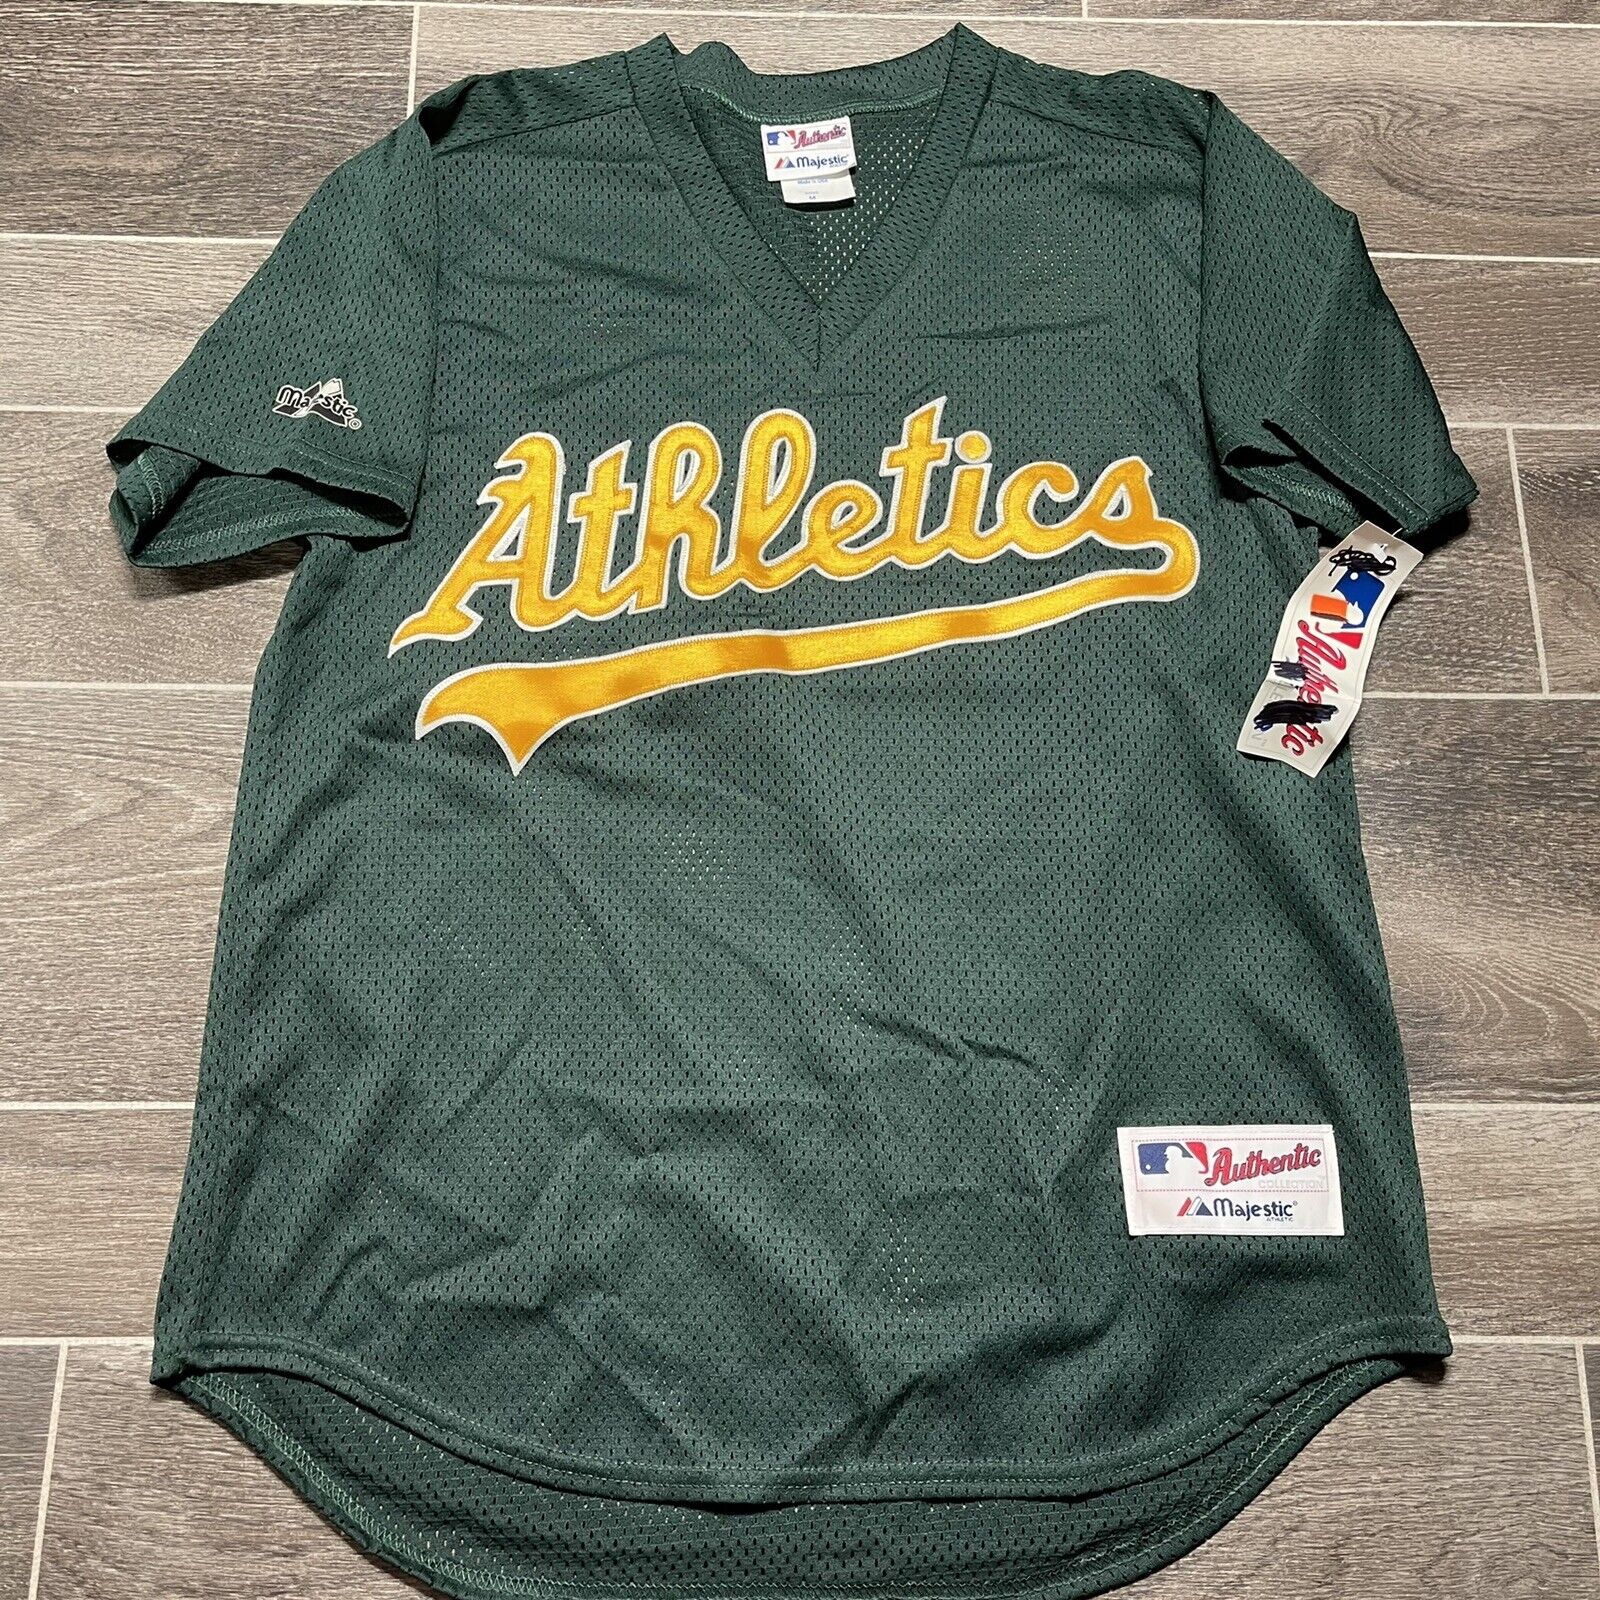 NWT Oakland A’s Athletics Authentic On-FIeld - Home Jersey MAJESTIC Club  Issued